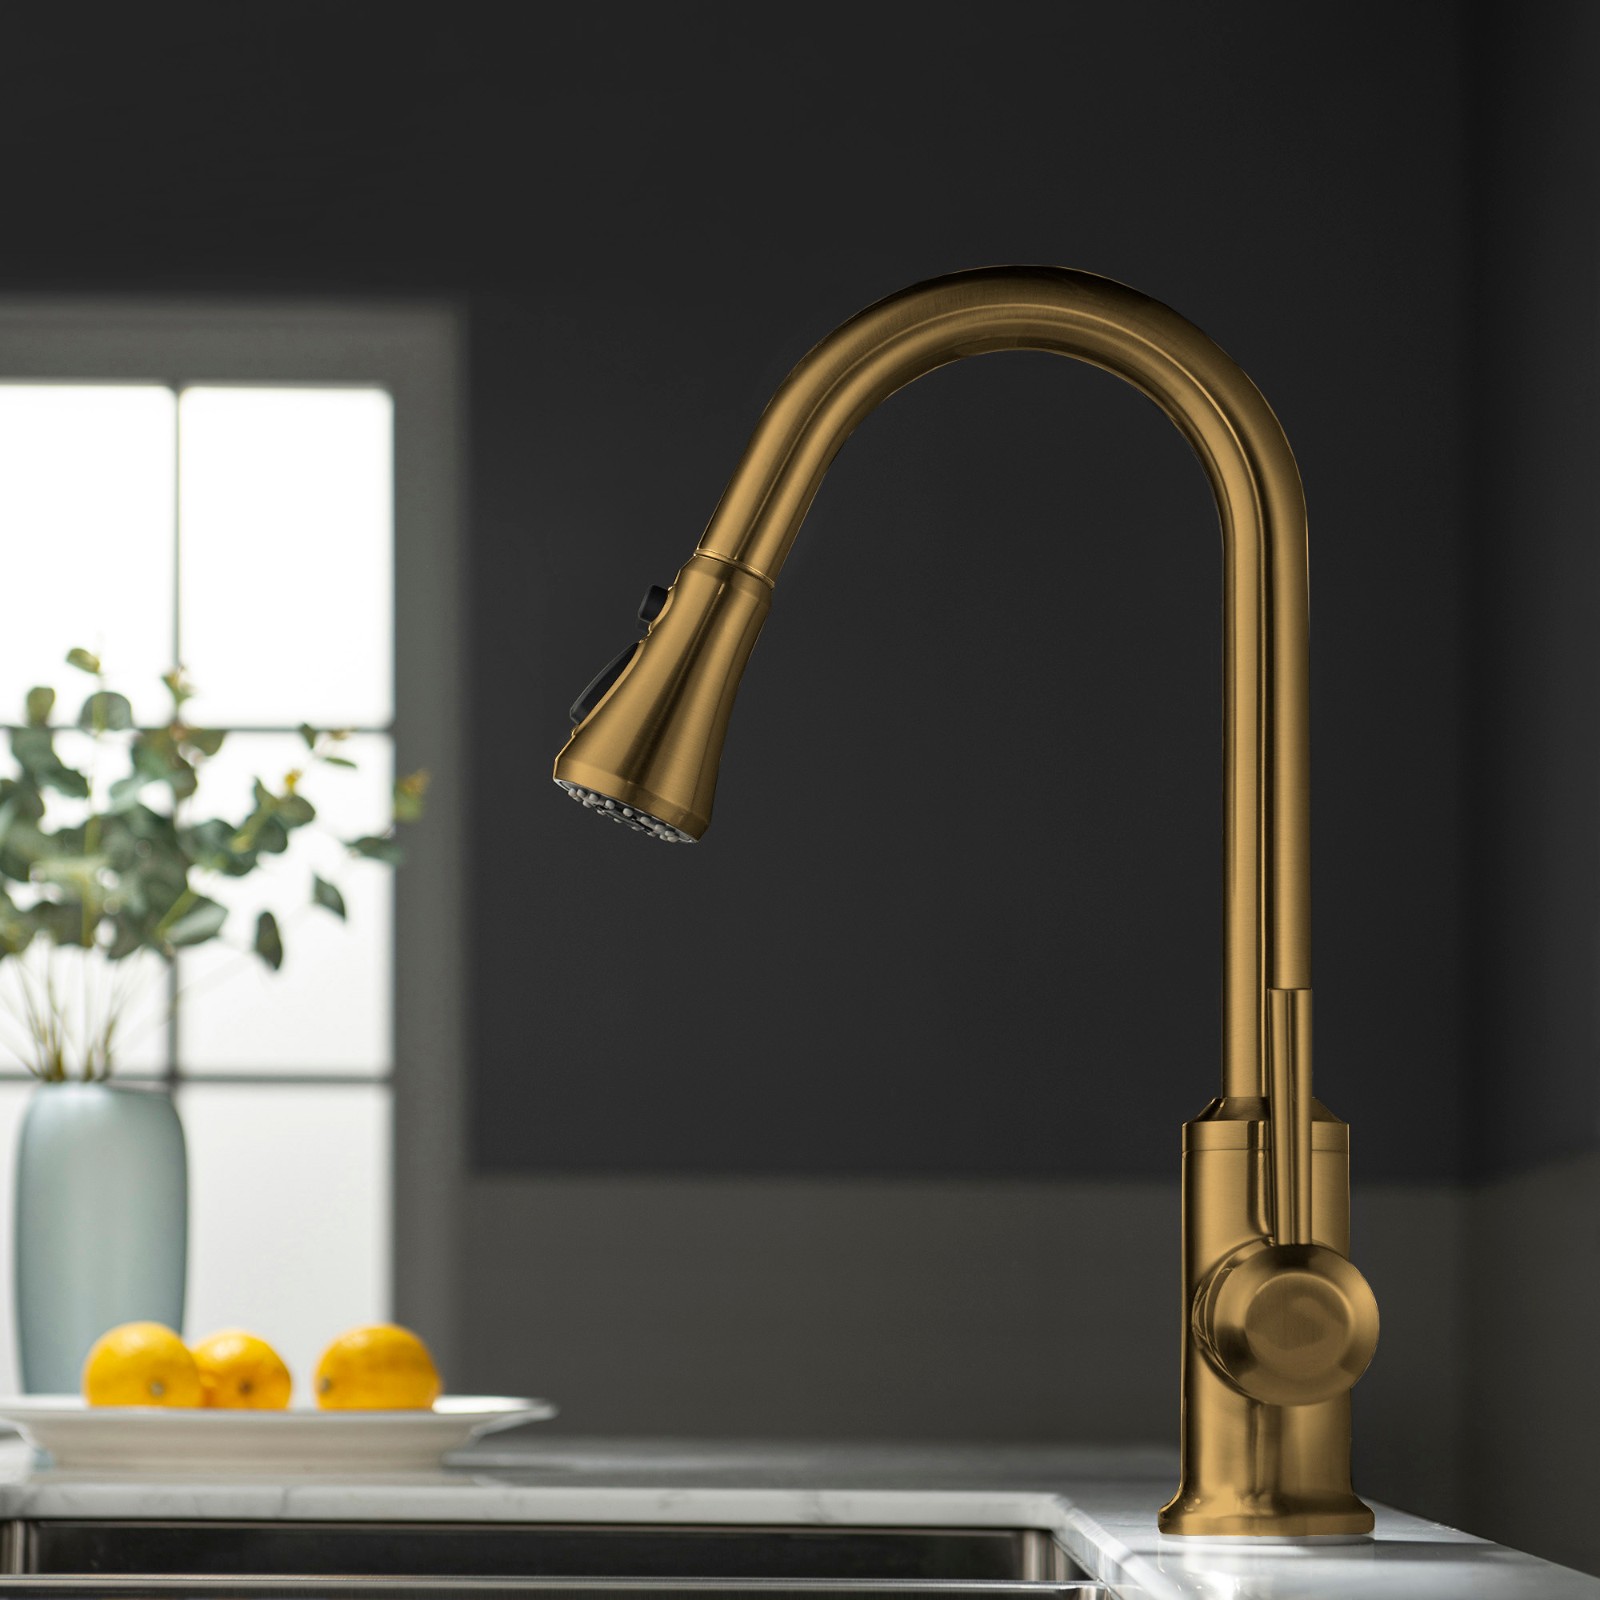  WOODBRIDGE WK101201BG Stainless Steel Single Handle Pull Down Kitchen Faucet in Brushed Gold Finish._4999